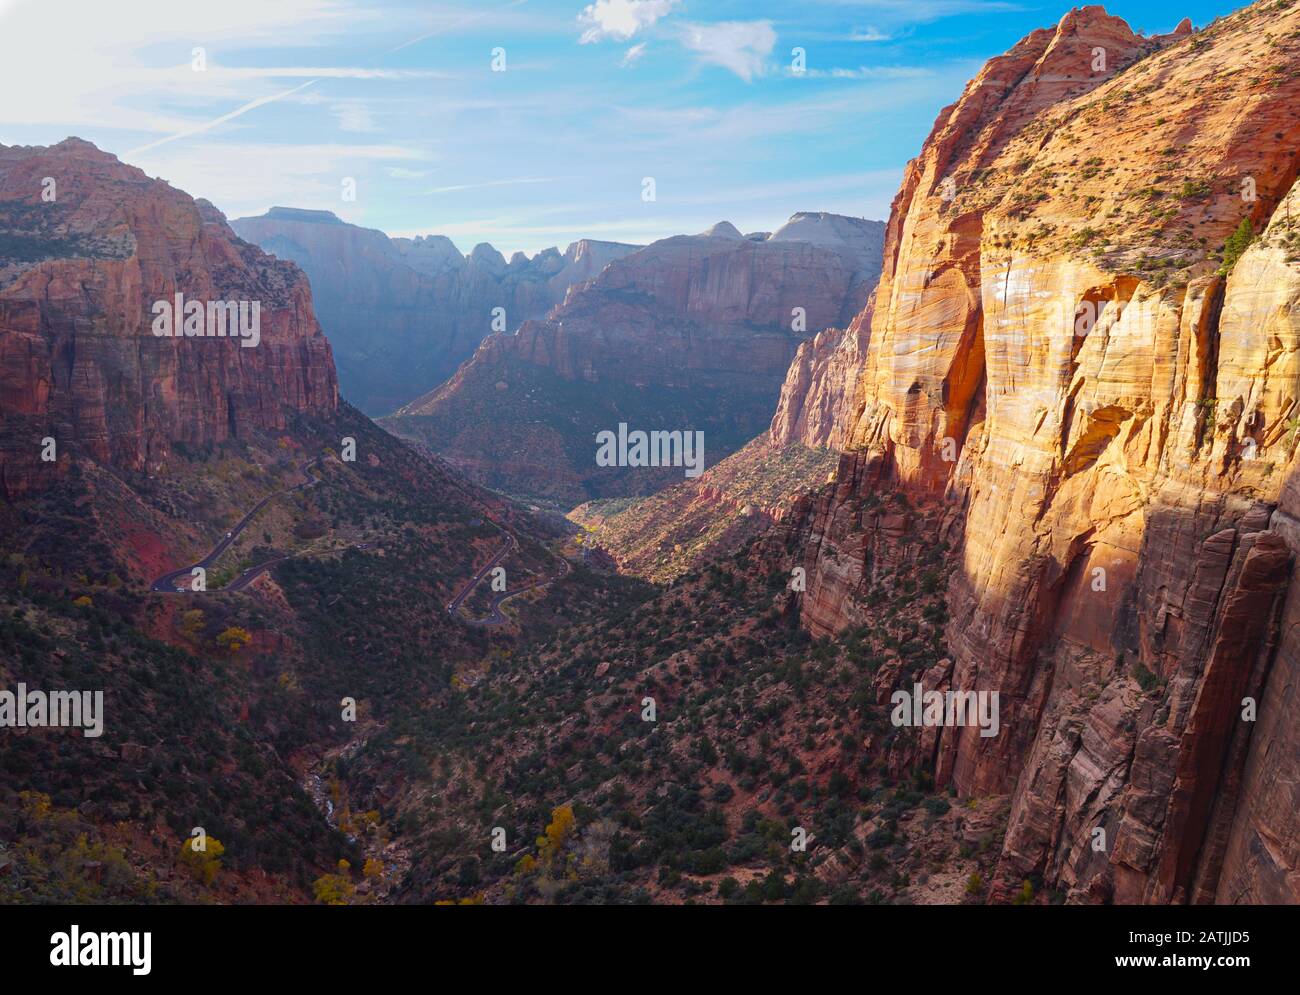 The gorgeous Zion canyon that holds the winding road up to Zion's Famous Zion-Mount Carmel Tunnel. Stock Photo